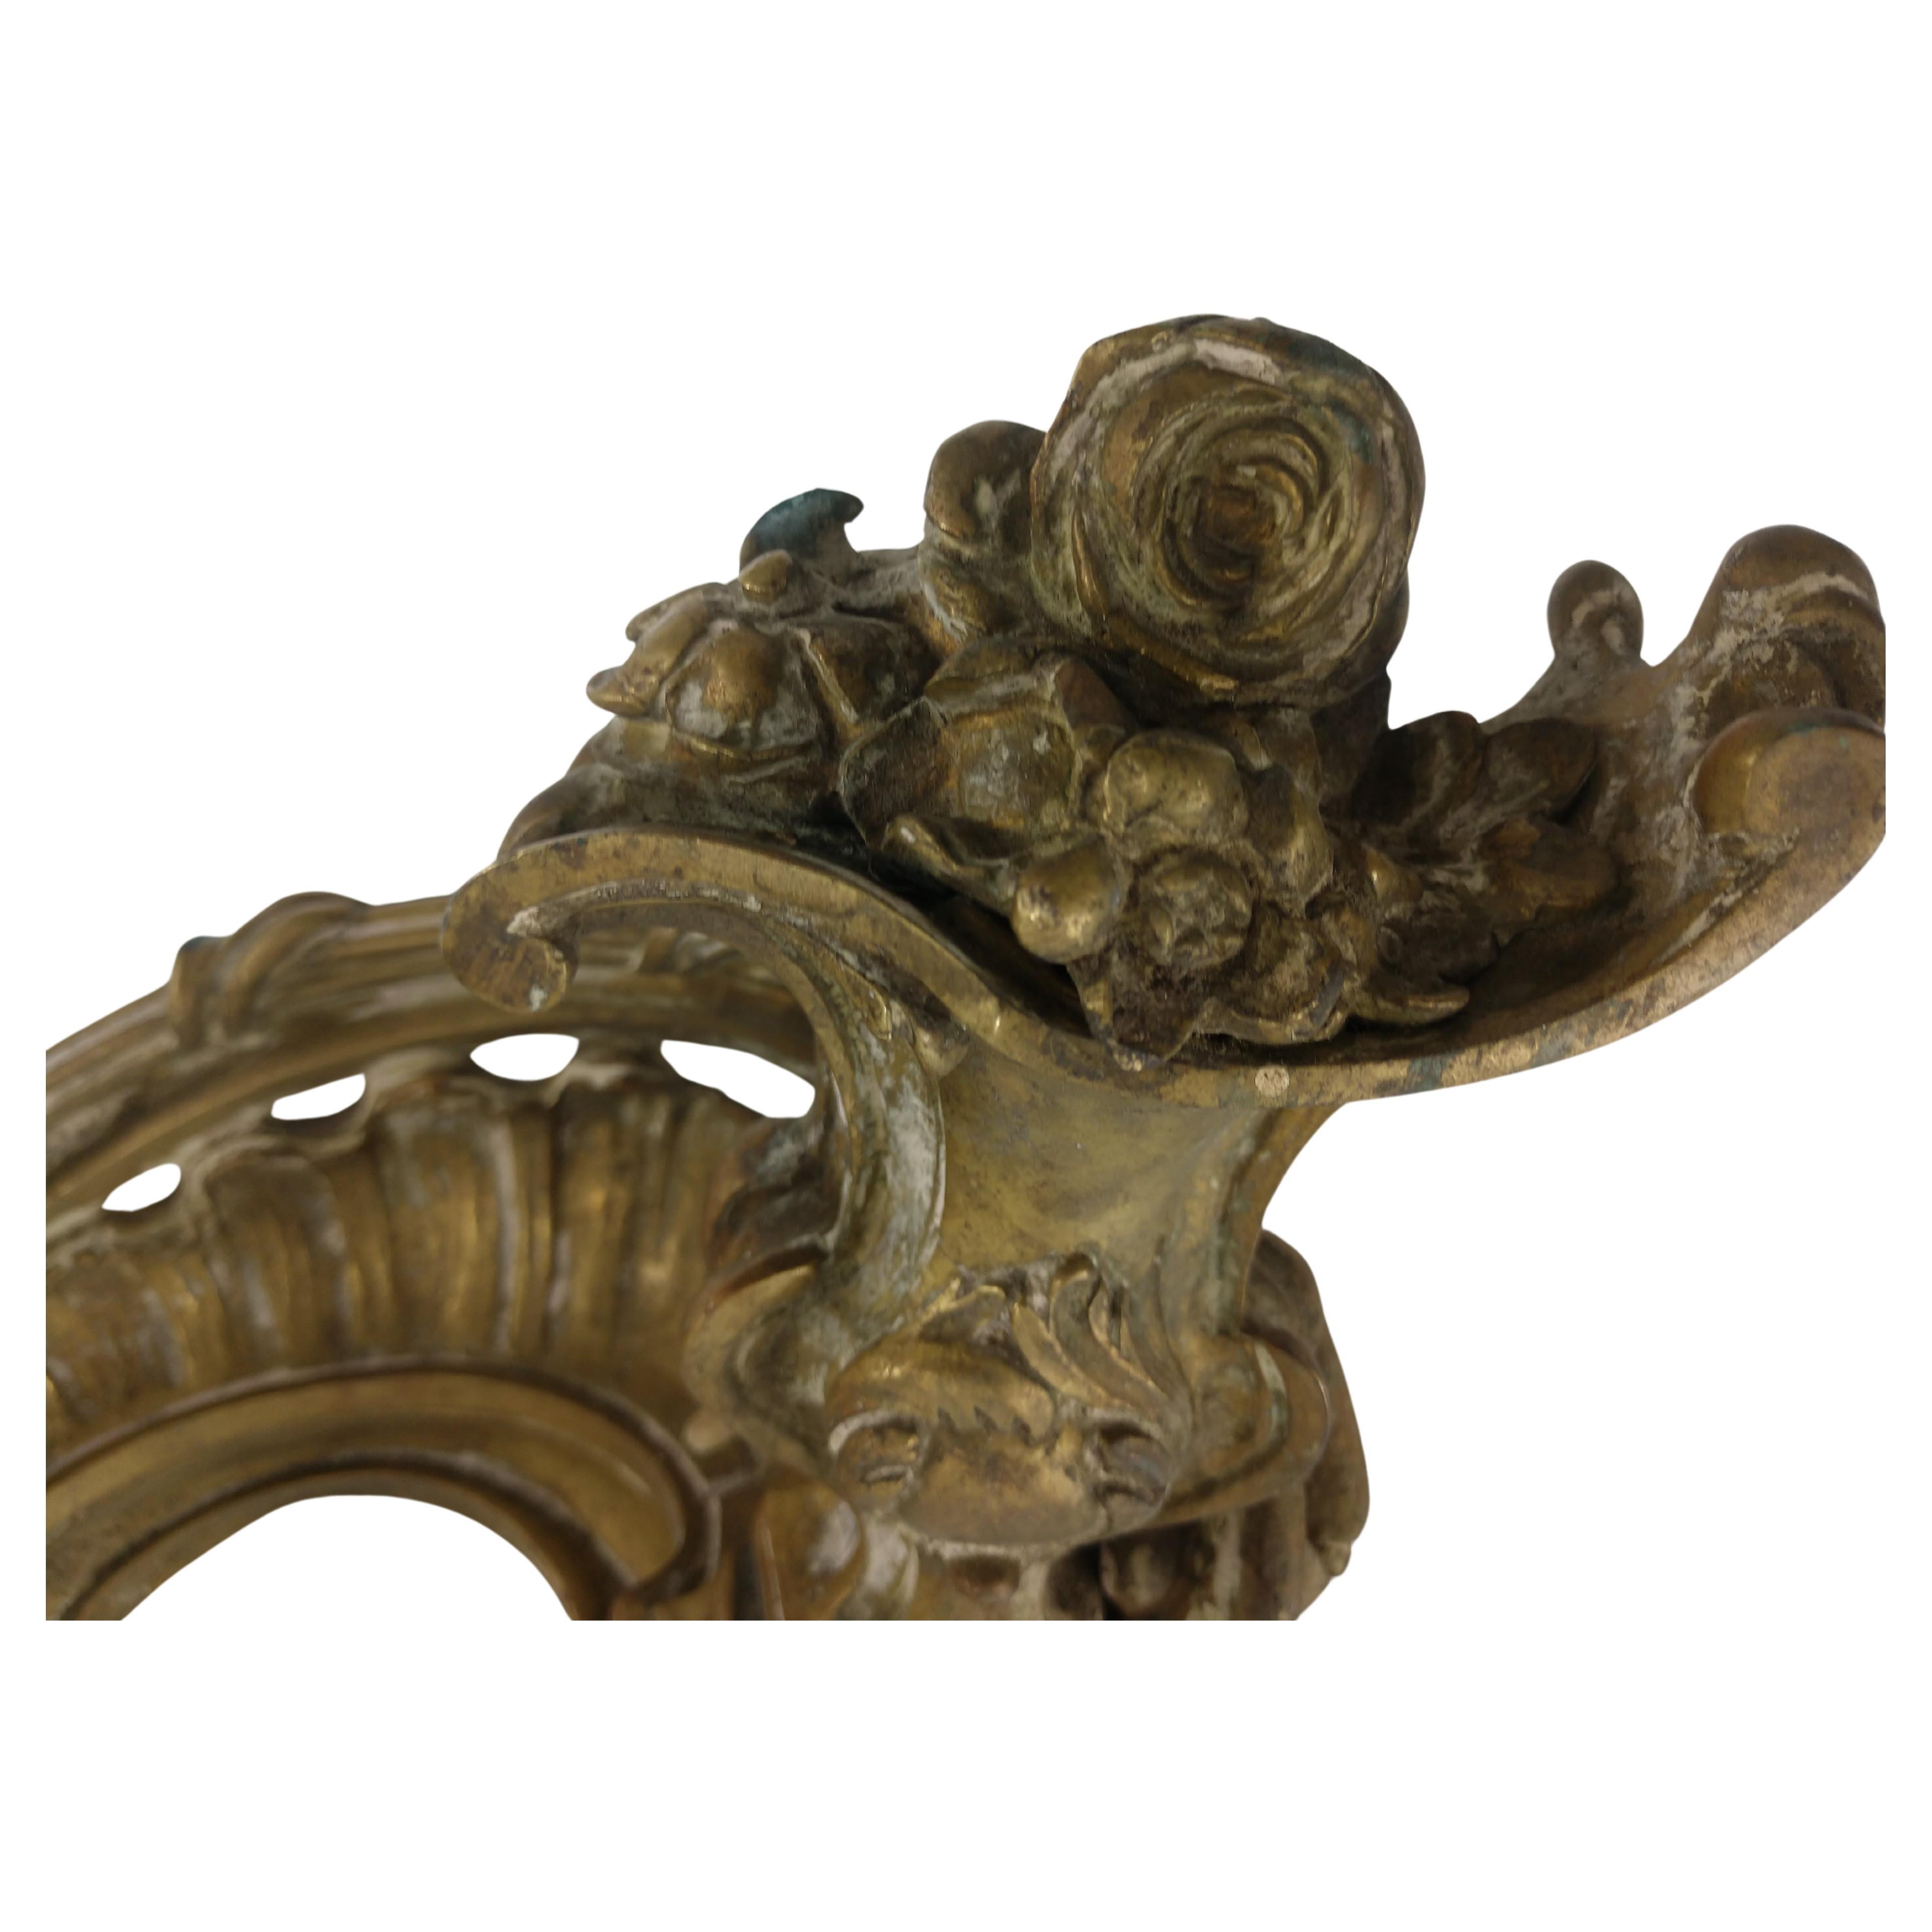 Beautifully detailed bronze casting of a pair of Chenets in a swirling bouquet design, very organic.